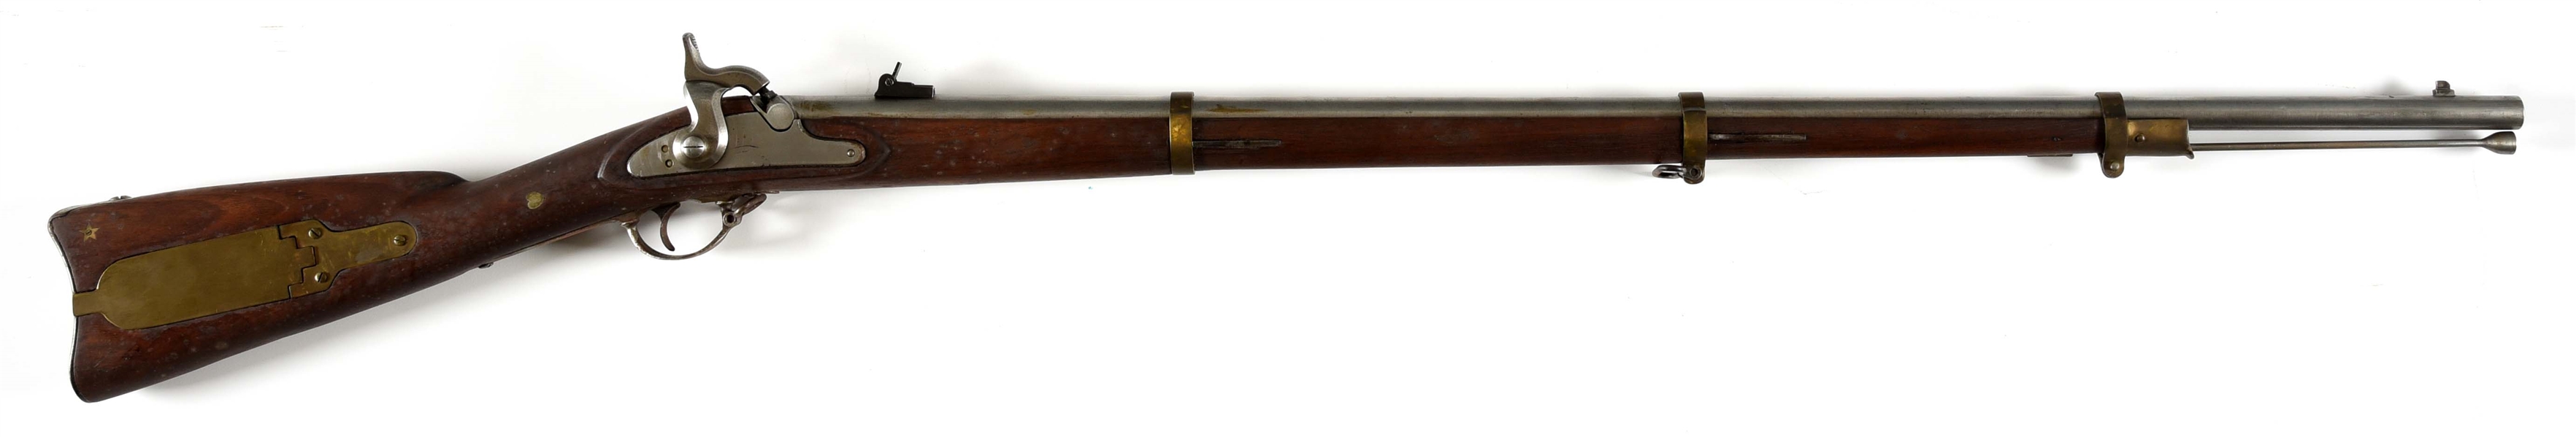 (A) REPRODUCTION OF A MISSISSIPPI RIFLE WITH STOCK INLAYS.